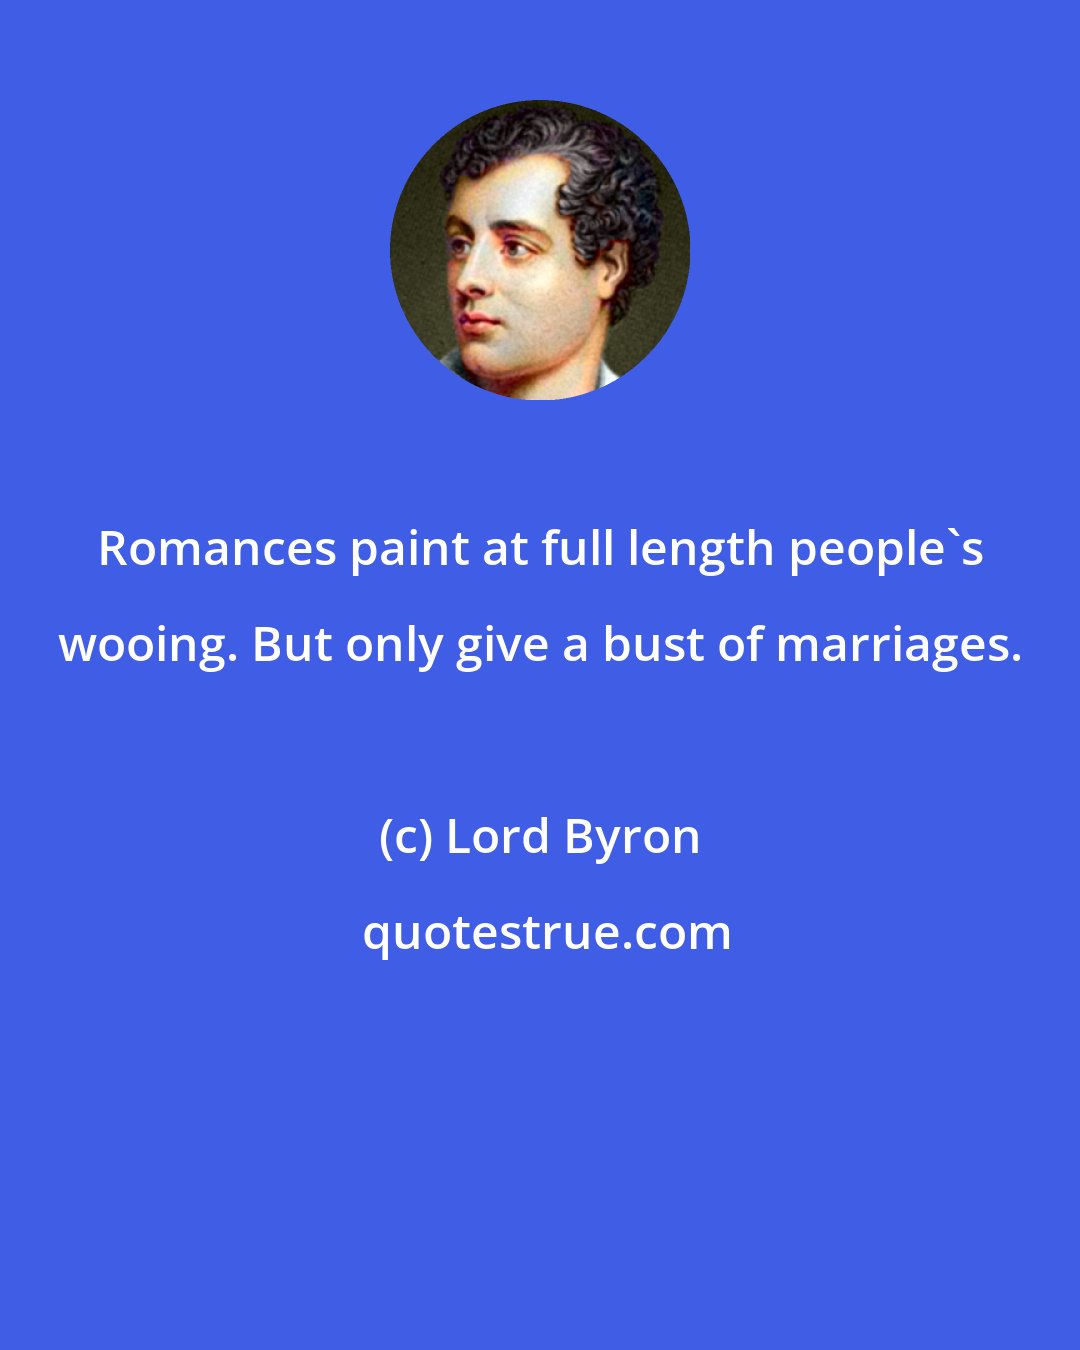 Lord Byron: Romances paint at full length people's wooing. But only give a bust of marriages.